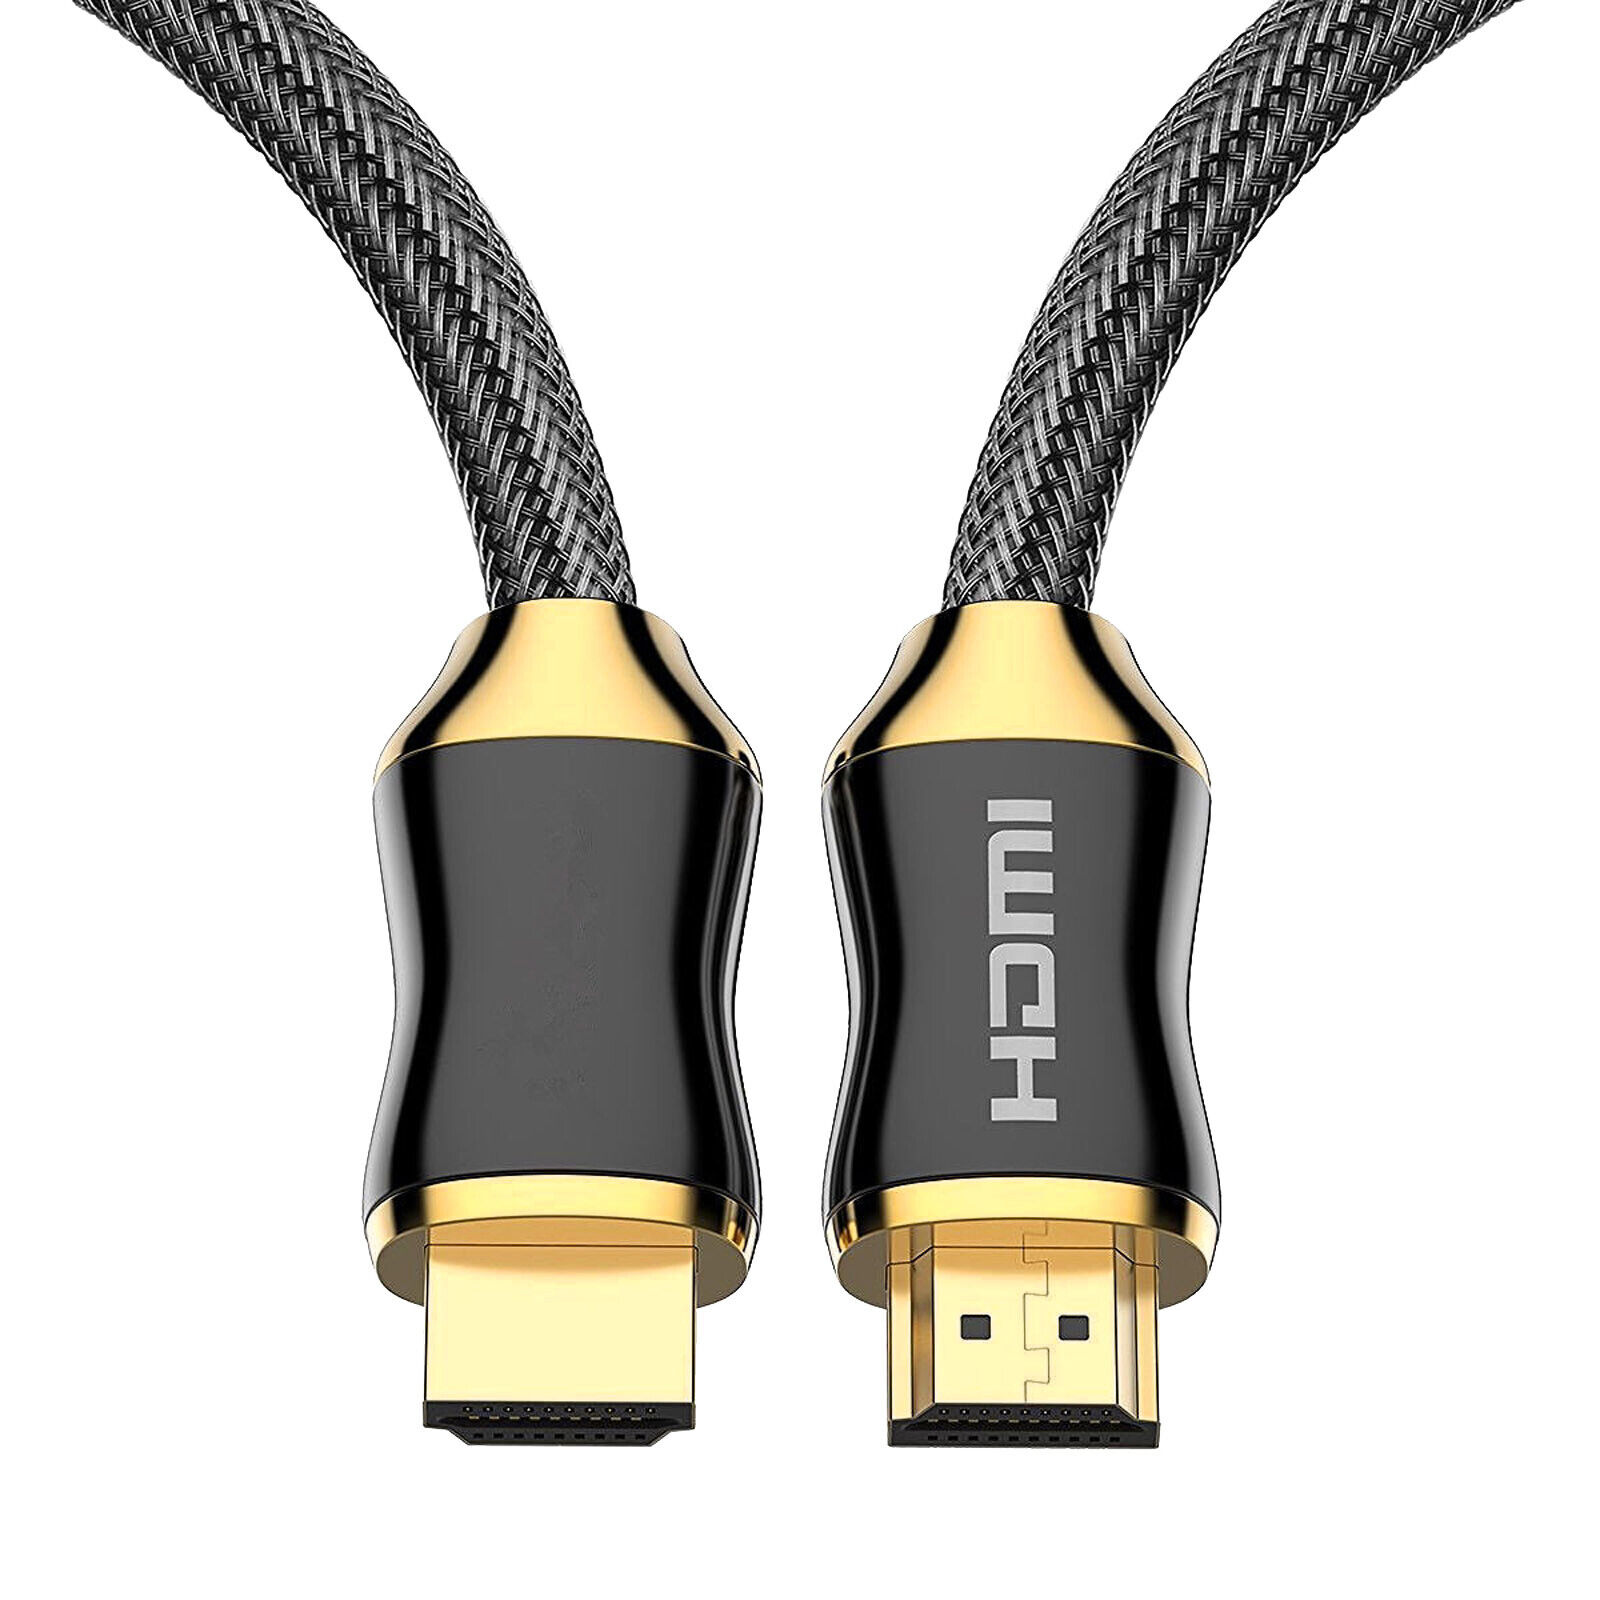 HDMI 2.0 cable Braided Alloy 4K@60Hz 48Gbps 2160p UHDTV 3ft 6ft 10ft 15ft Lot. Available Now for 17.09